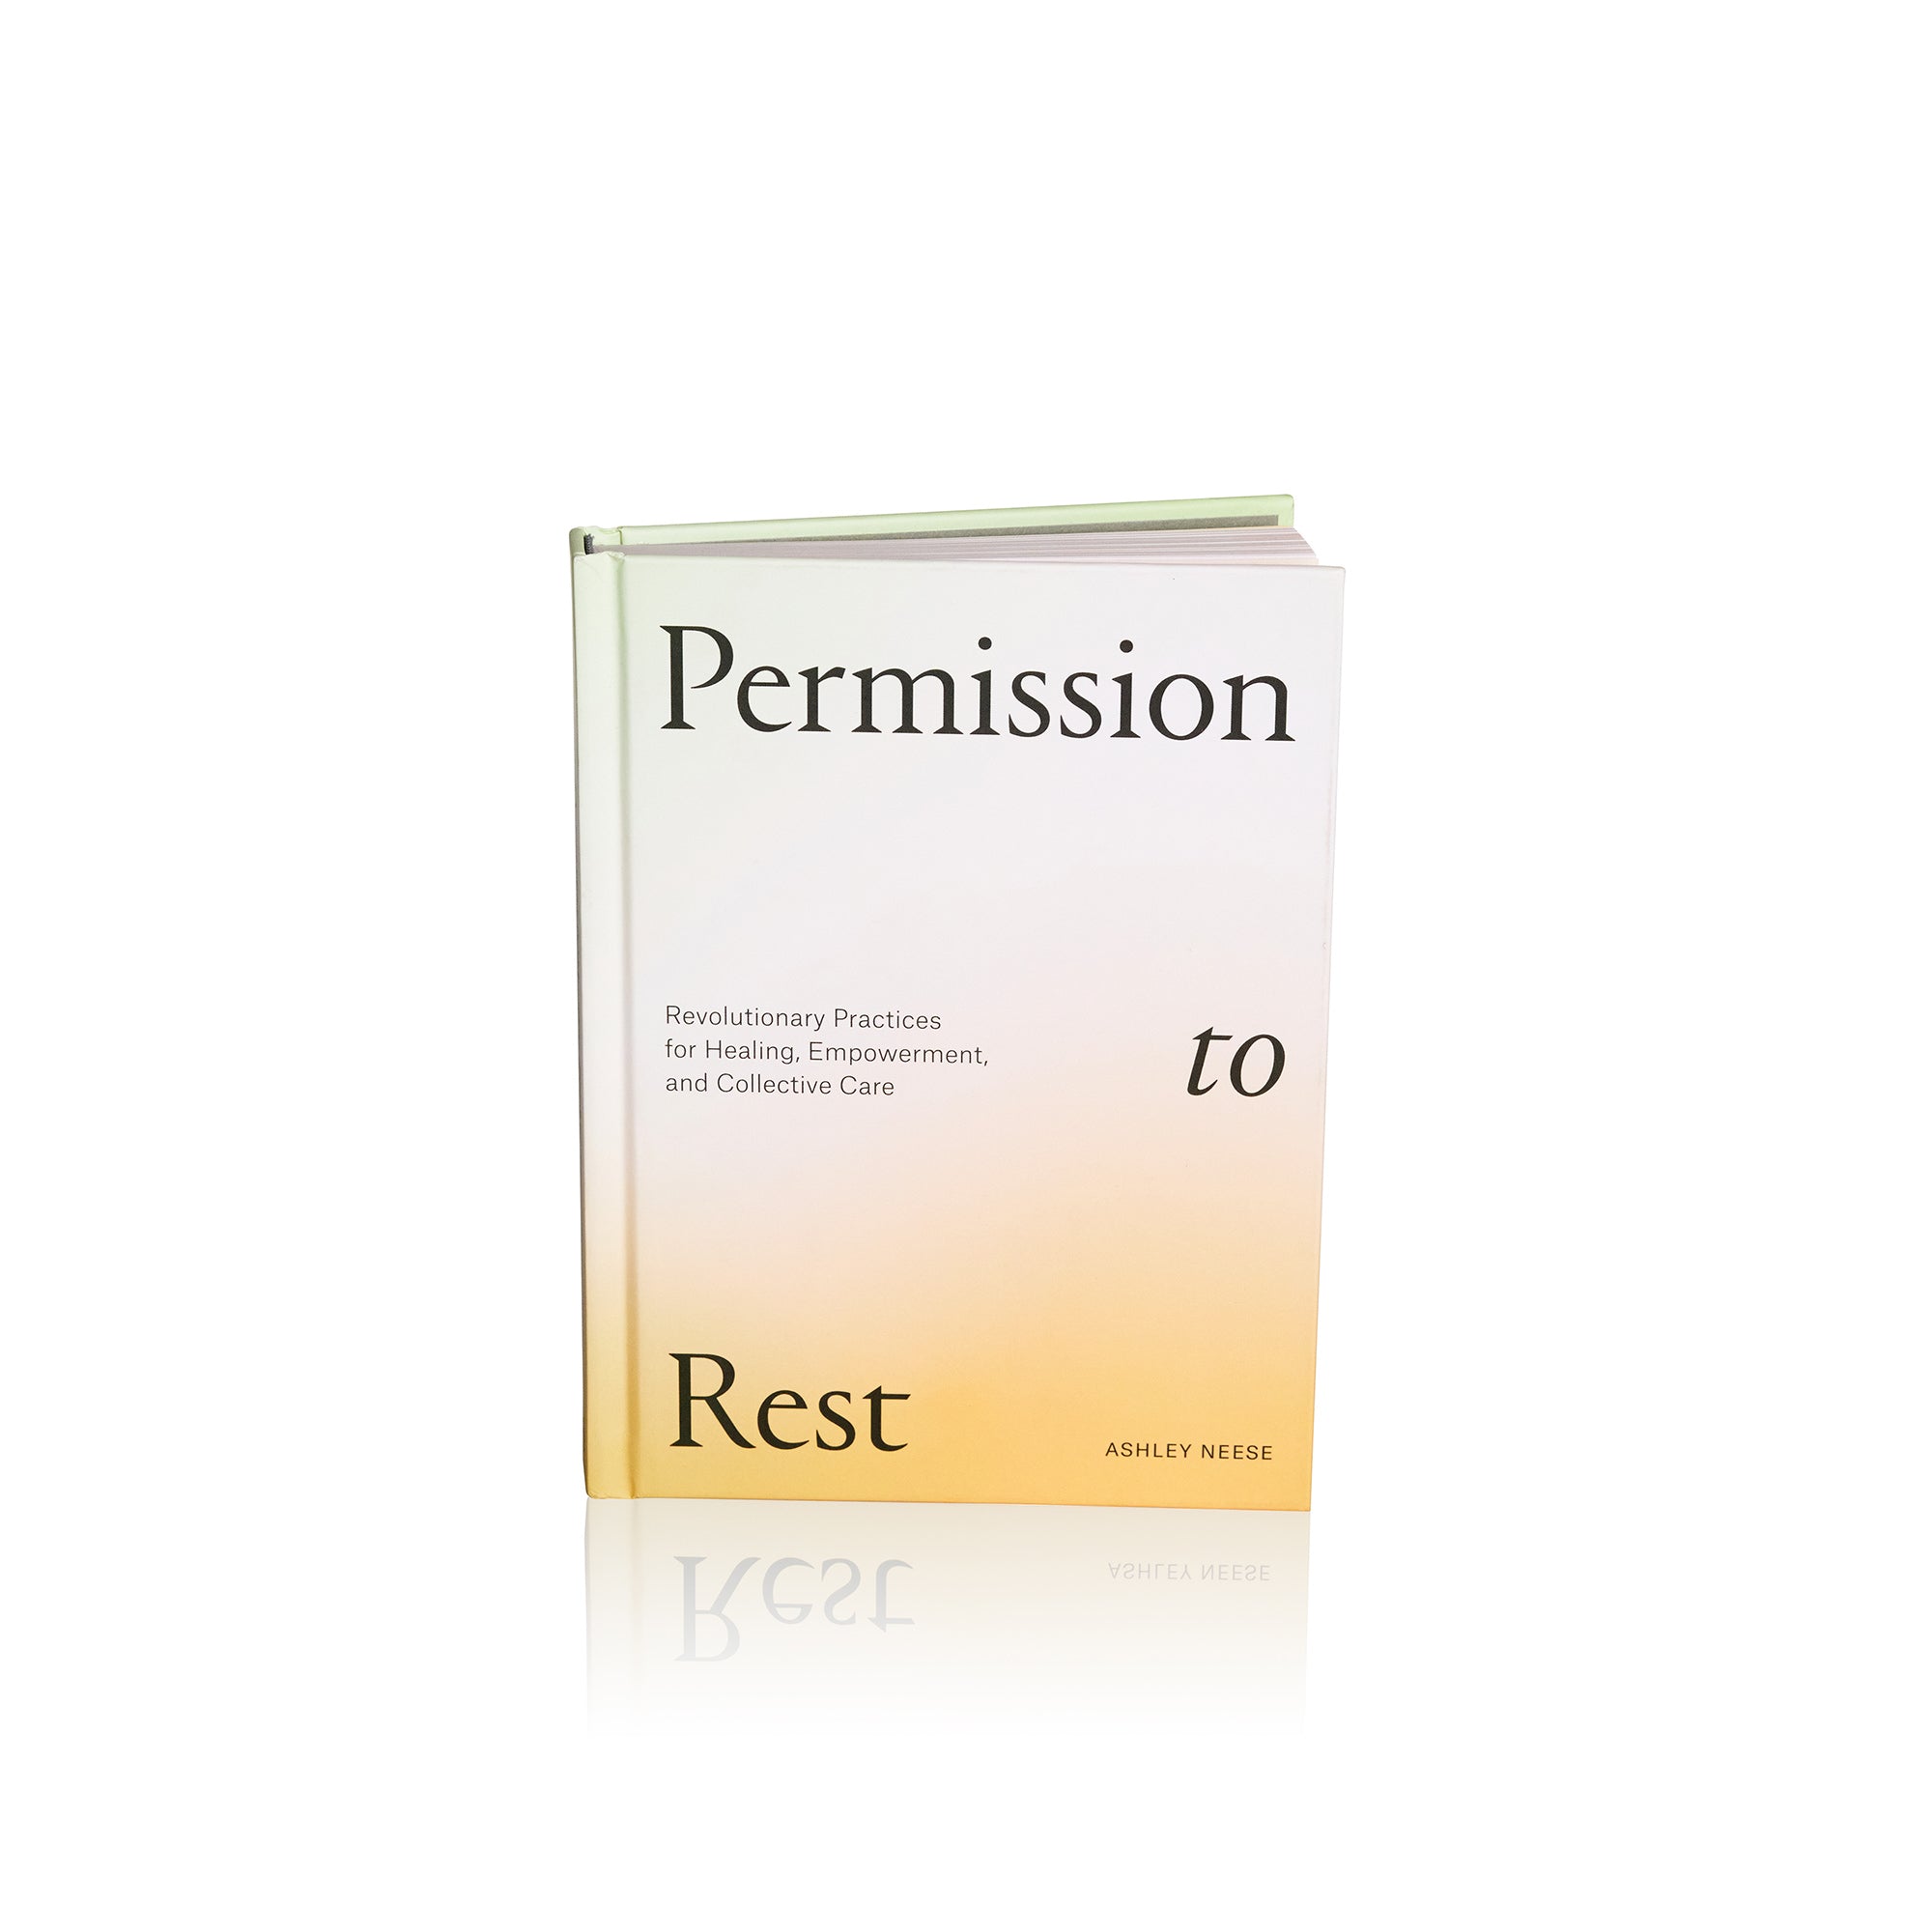 Permission to Rest by Ashley Neese